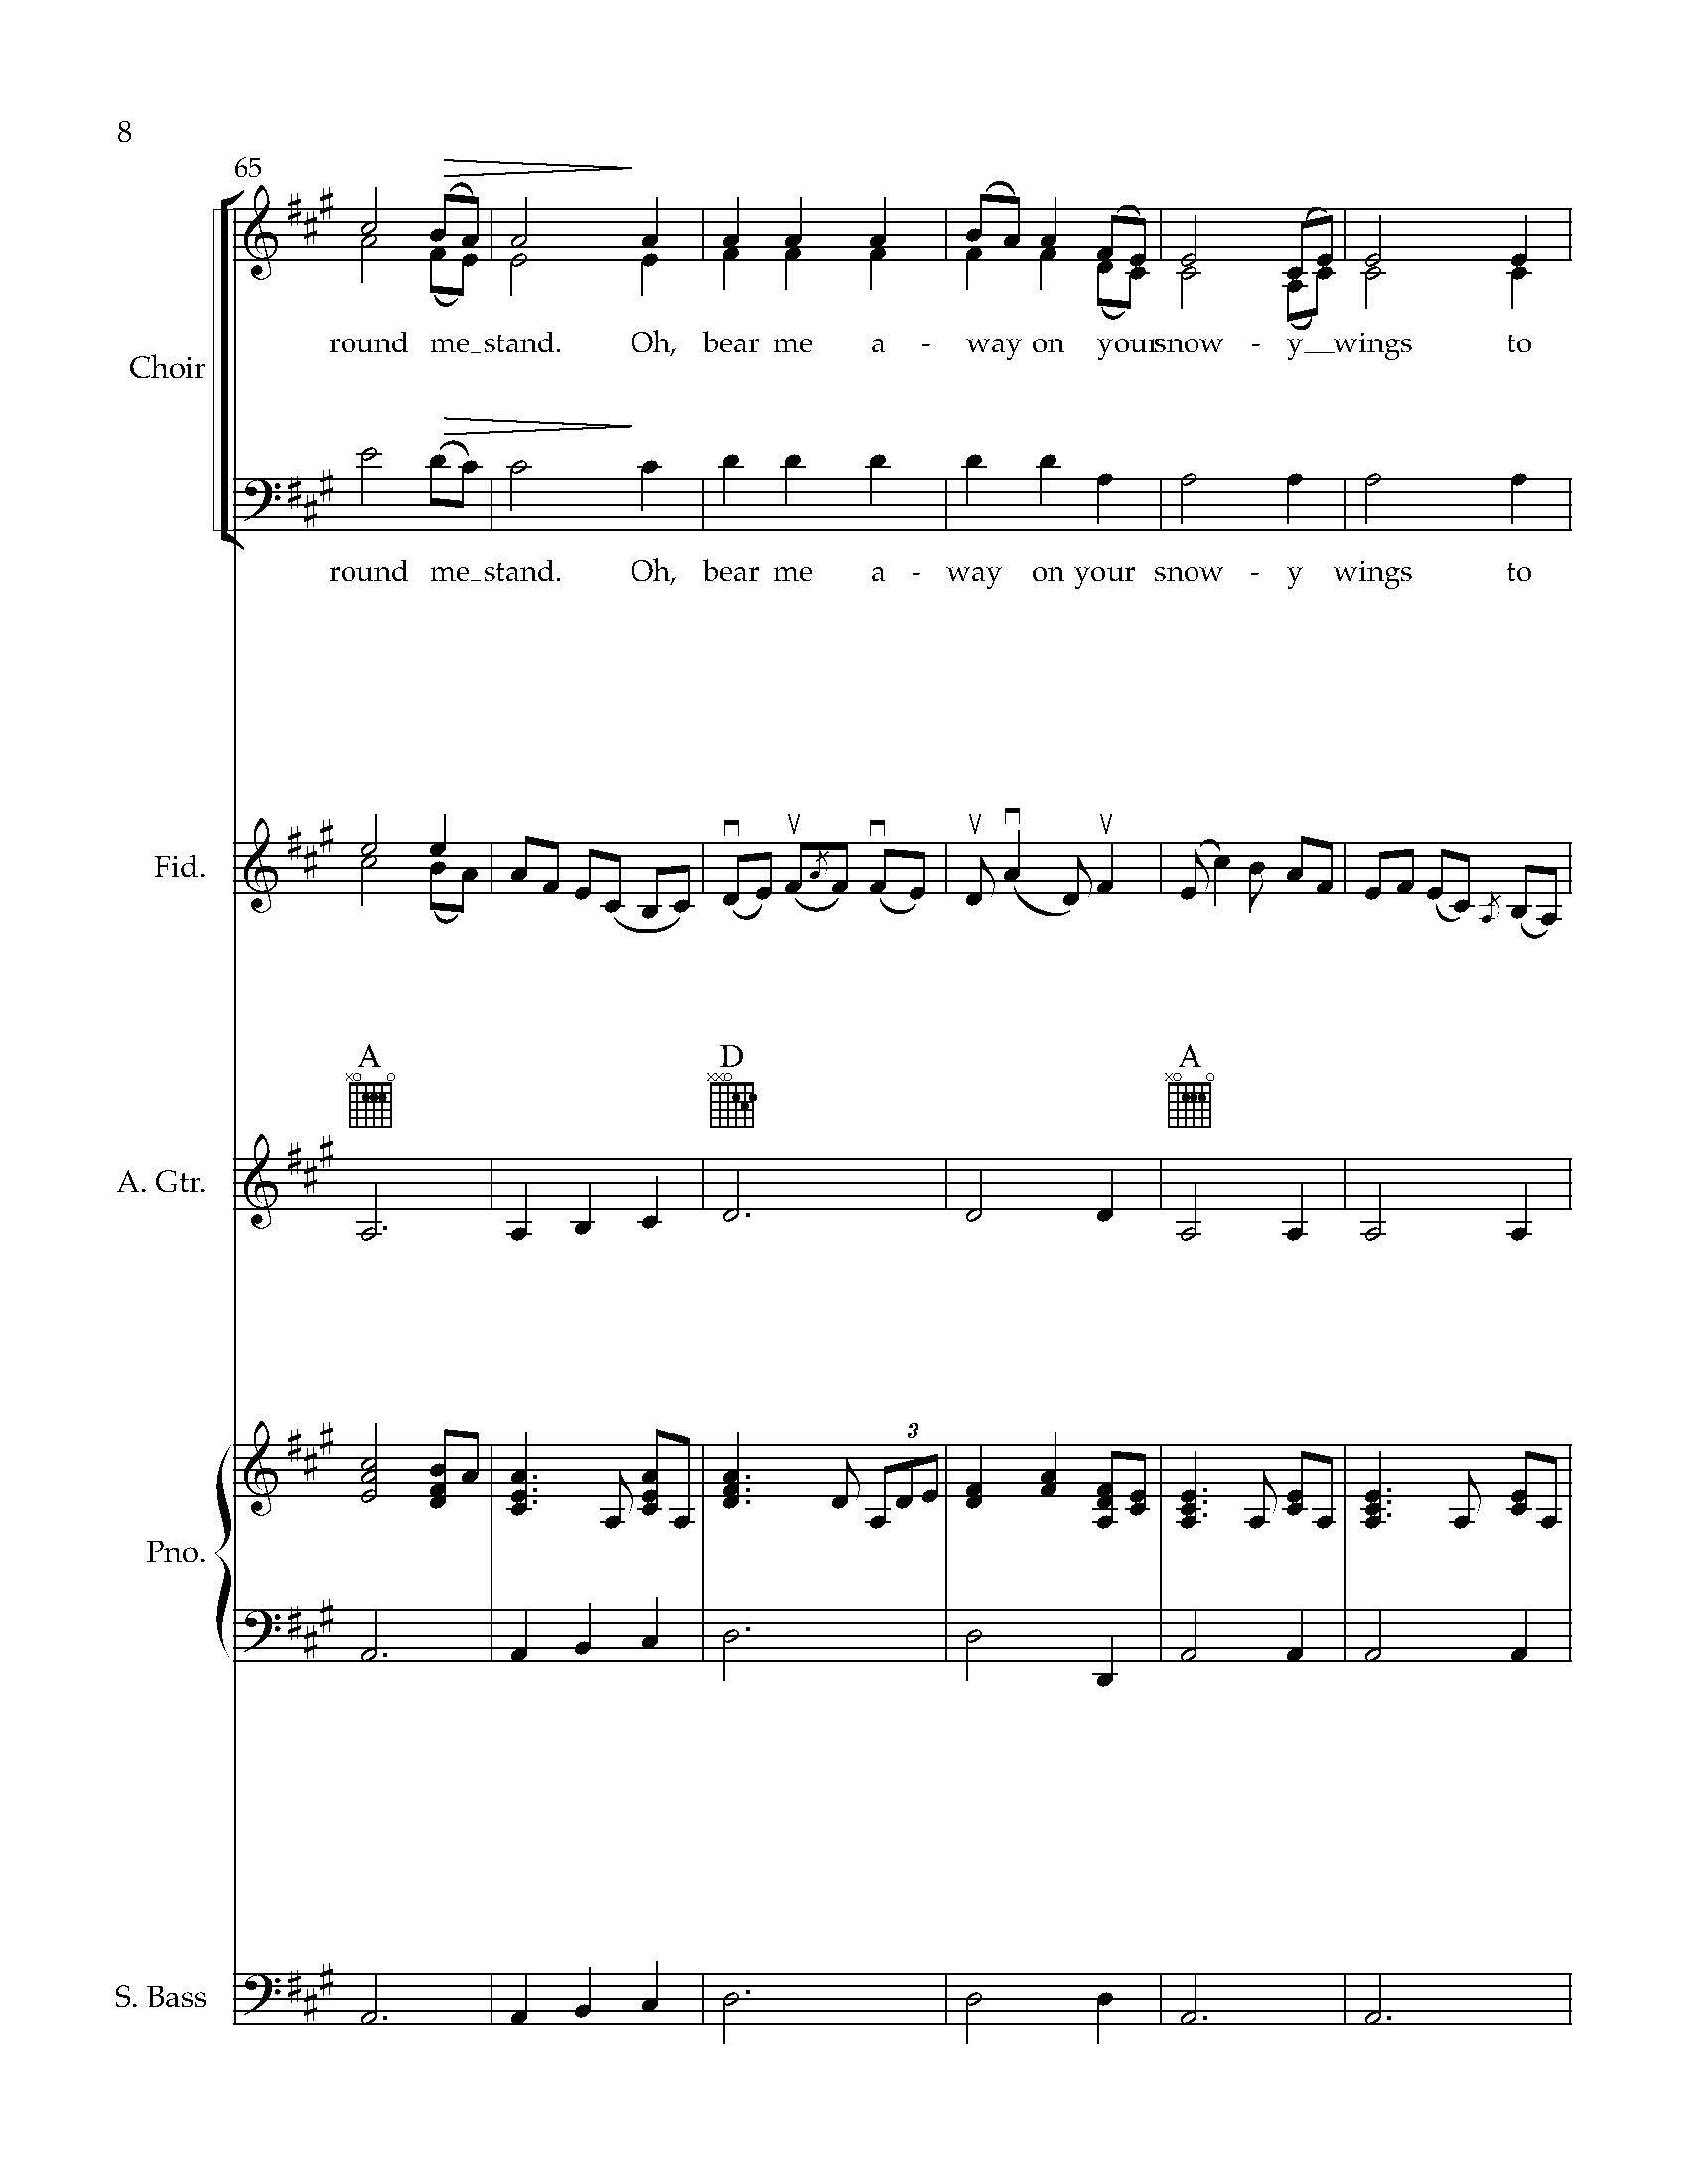 FULL SCORE preview - Angel Band for choir, fiddle, piano, guitar, and bass - arr_Page_08.jpg